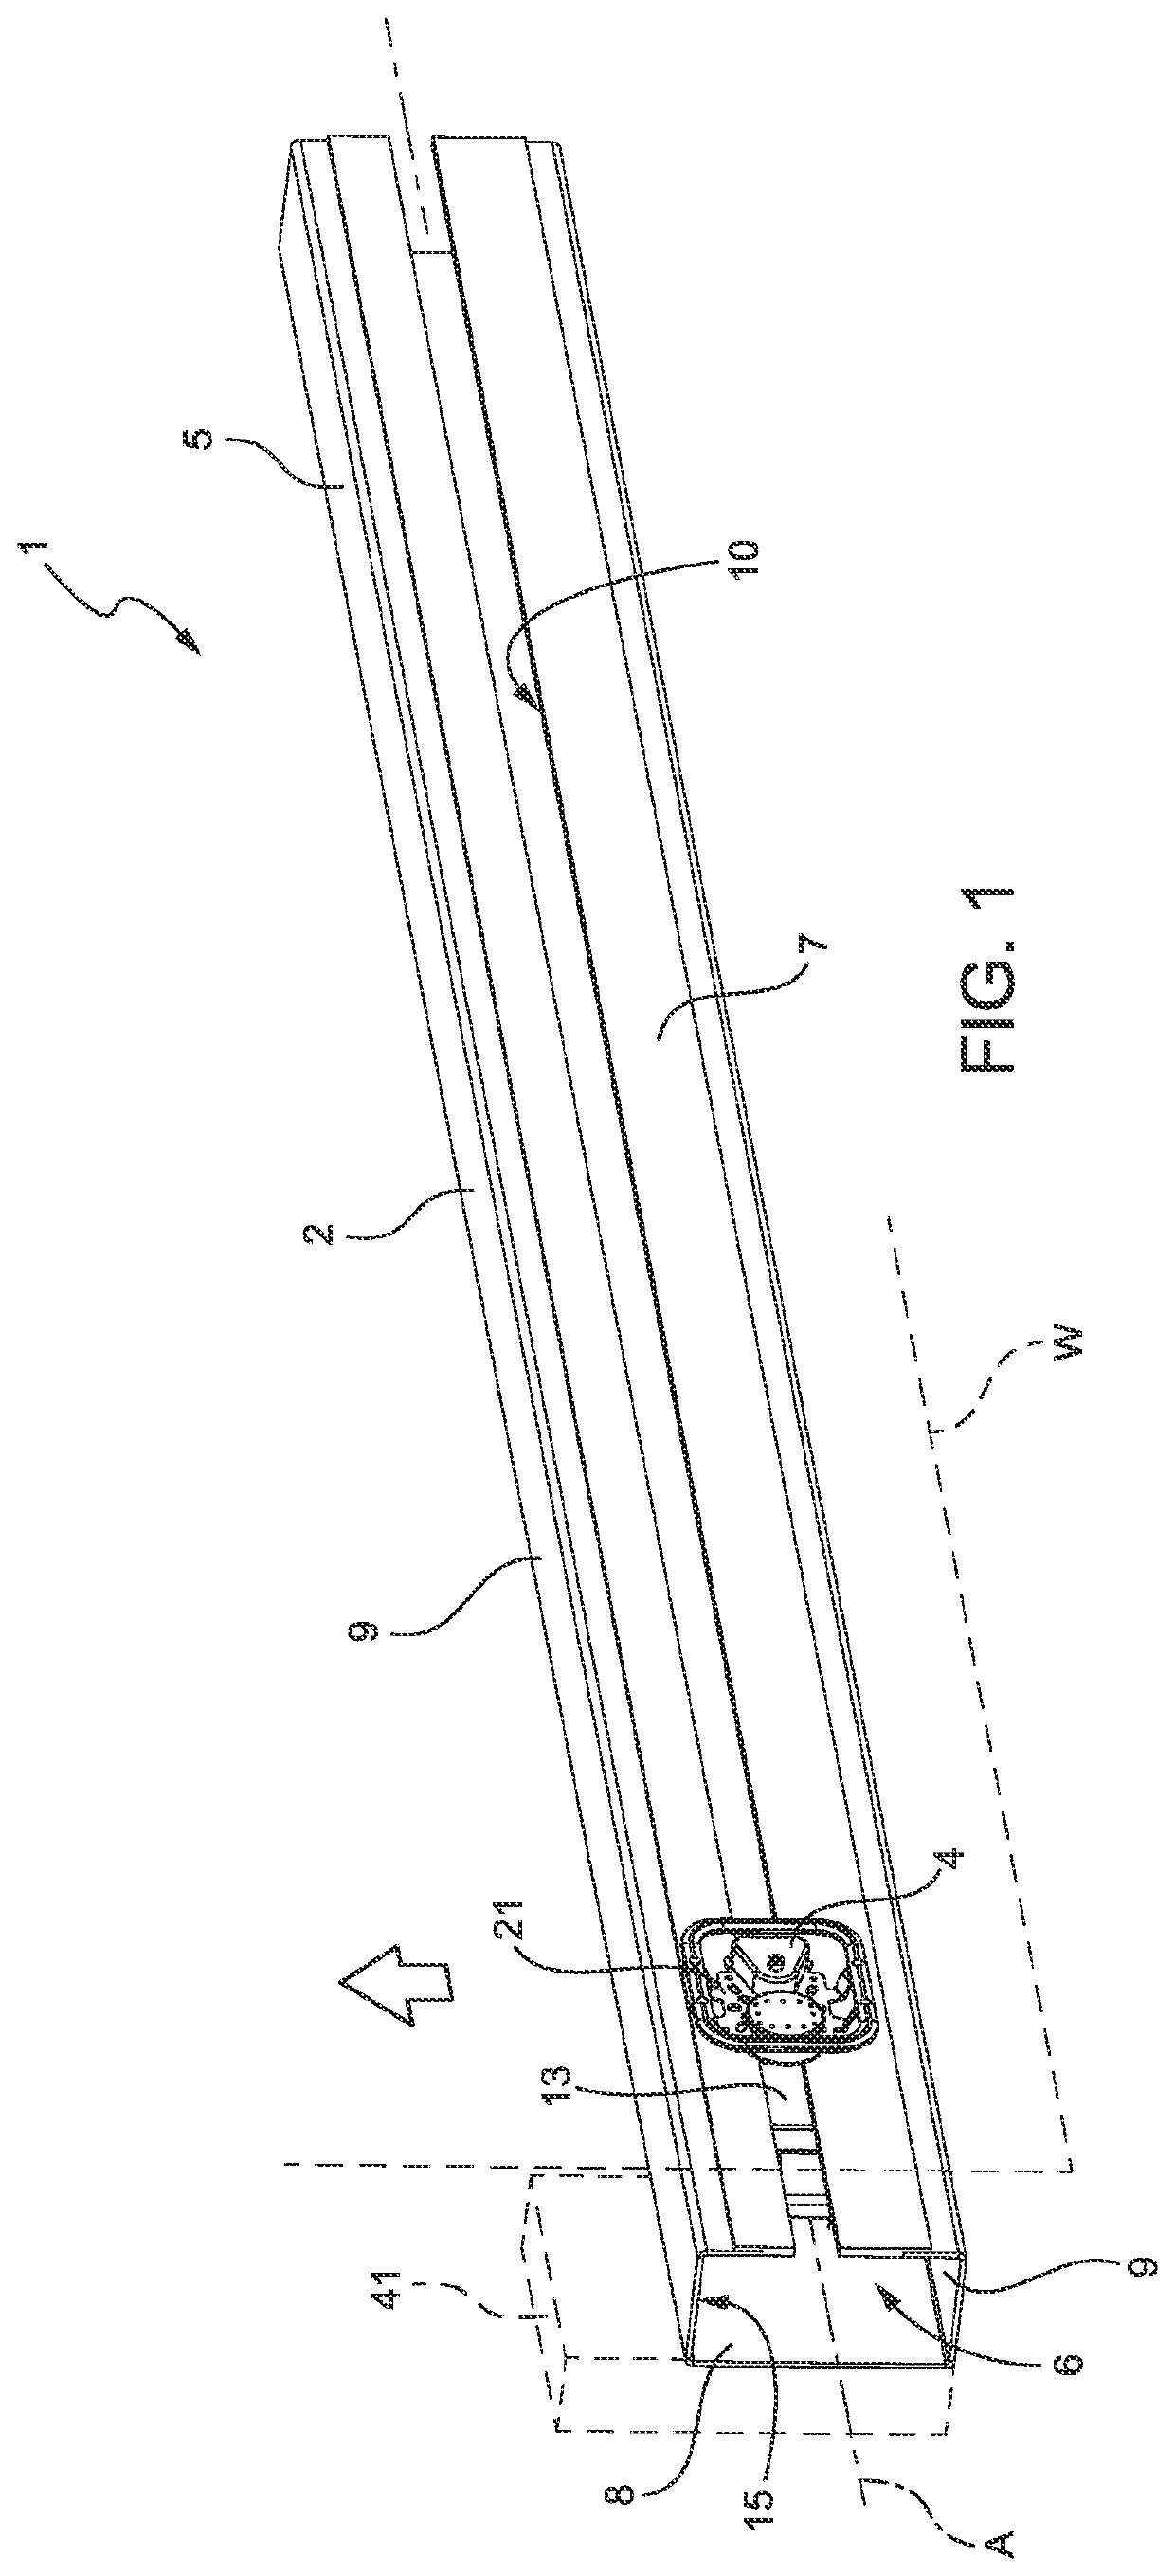 Monitoring system for monitoring the conditions of a band circulating in a papermaking machine